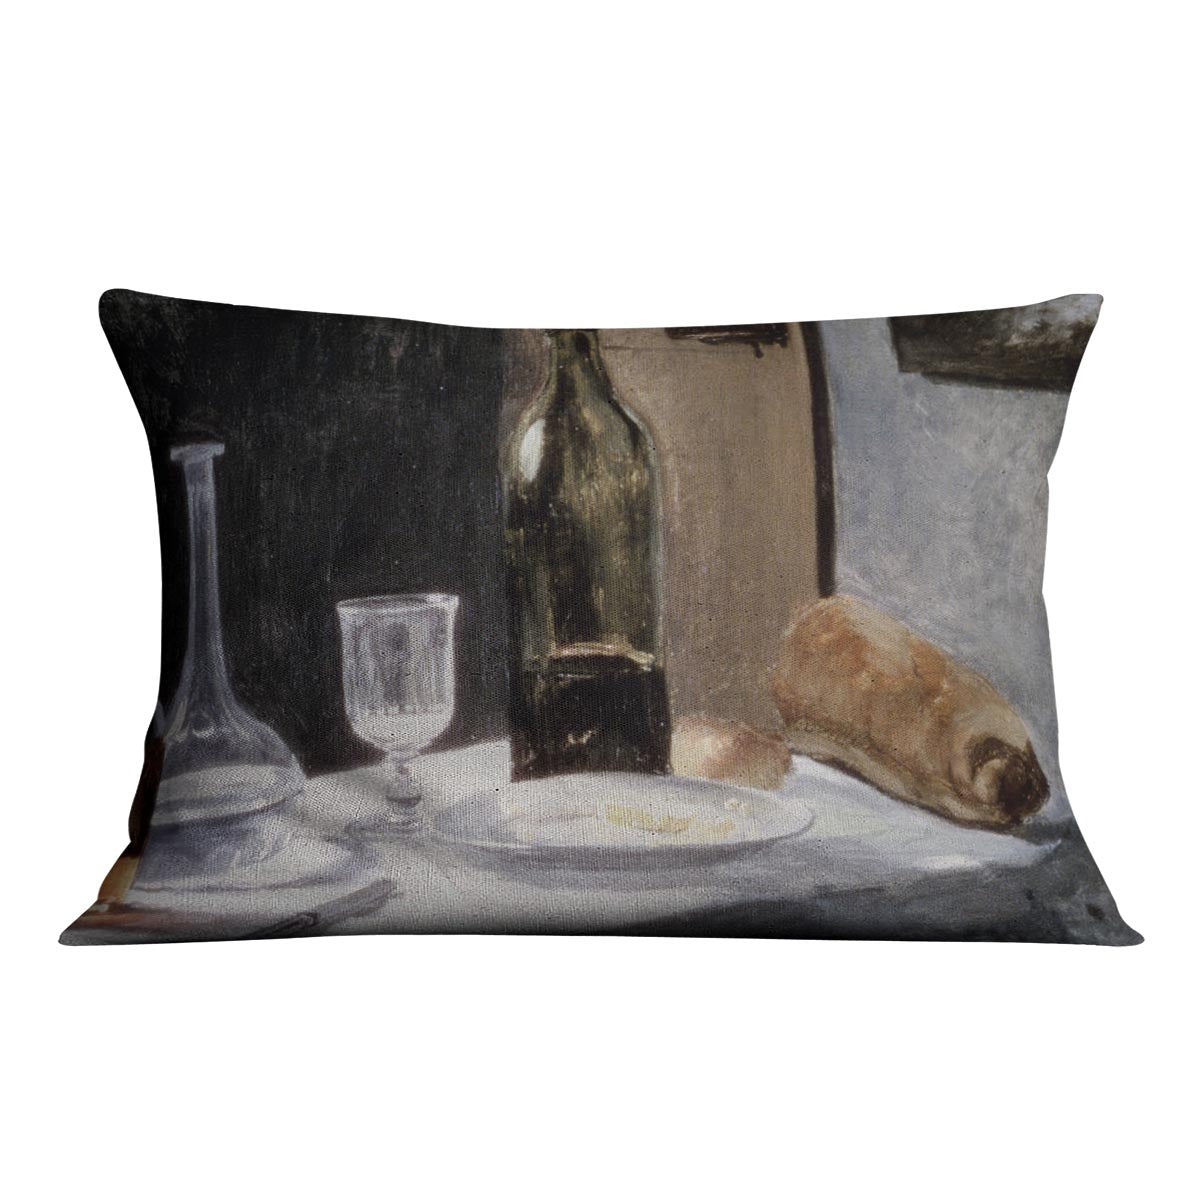 Still Life With Bottles by Monet Cushion